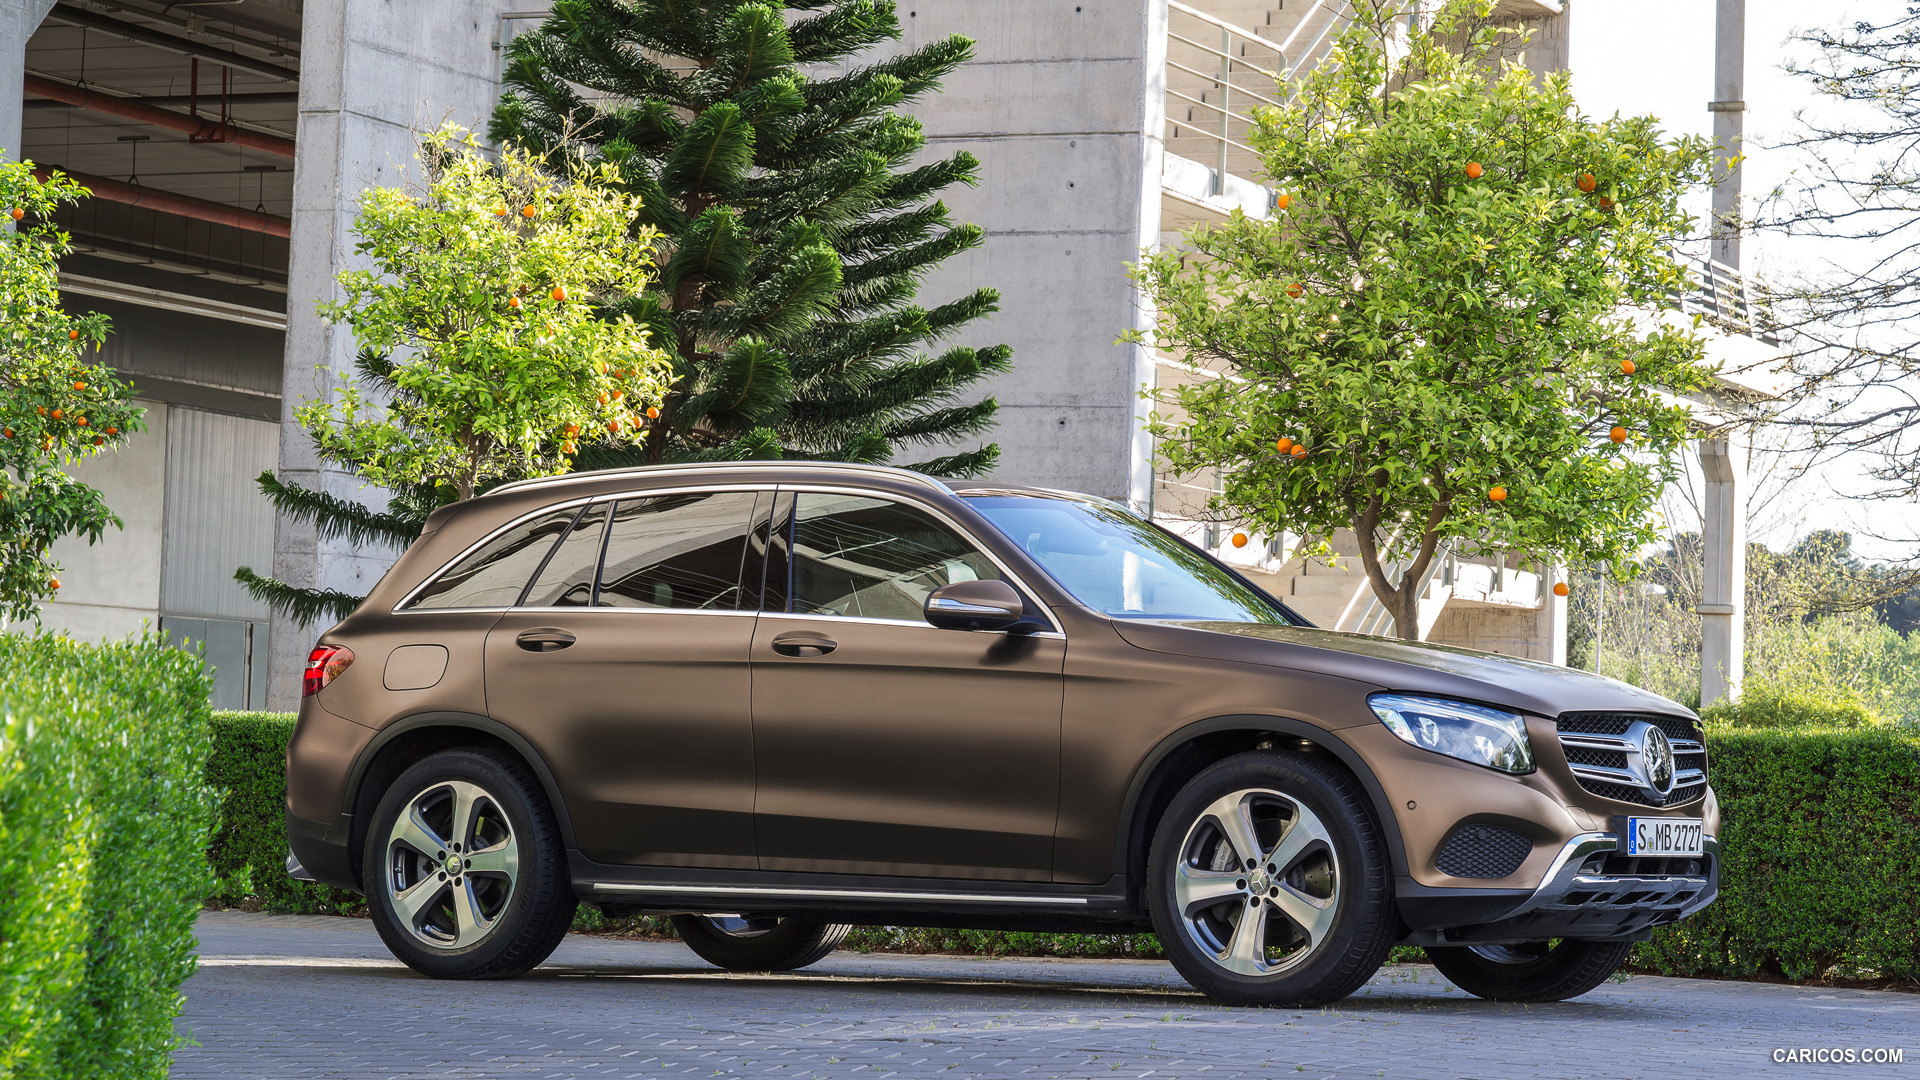 2016 Mercedes-Benz GLC-Class GLC 250d 4MATIC (CITRINE BROWN MAGNO, Offroad Line) - Side, #46 of 254